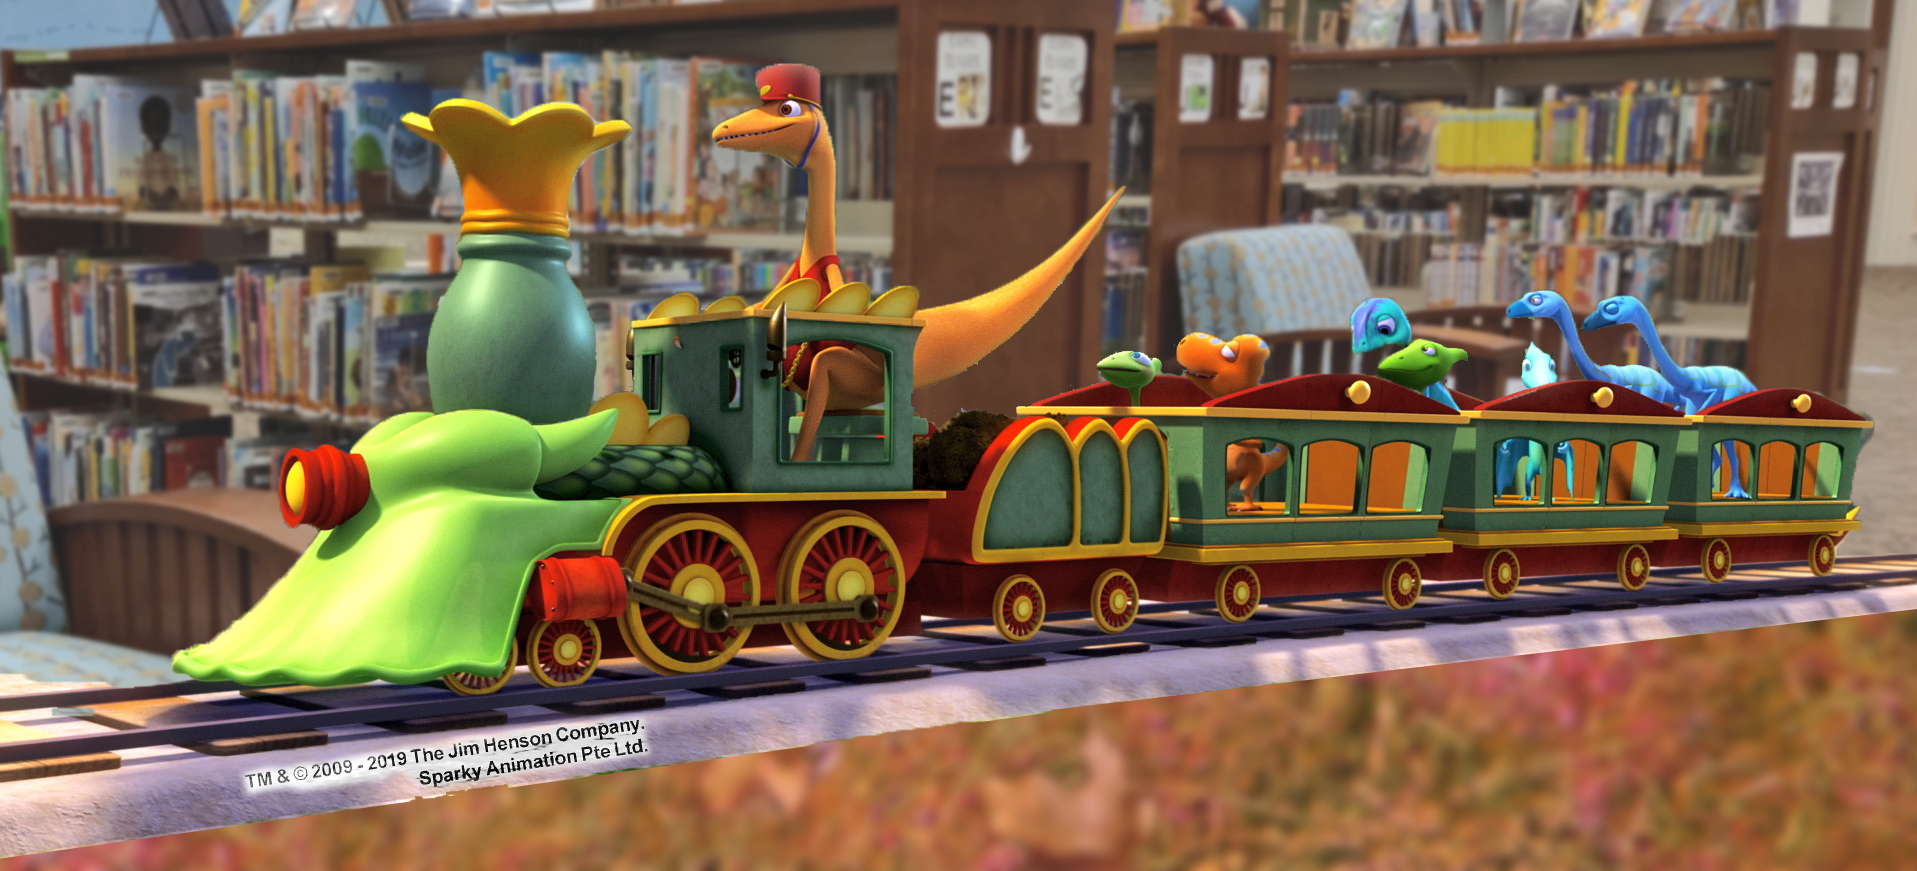 Dinosaur Train from the television series riding through the SFPL Juvenile section